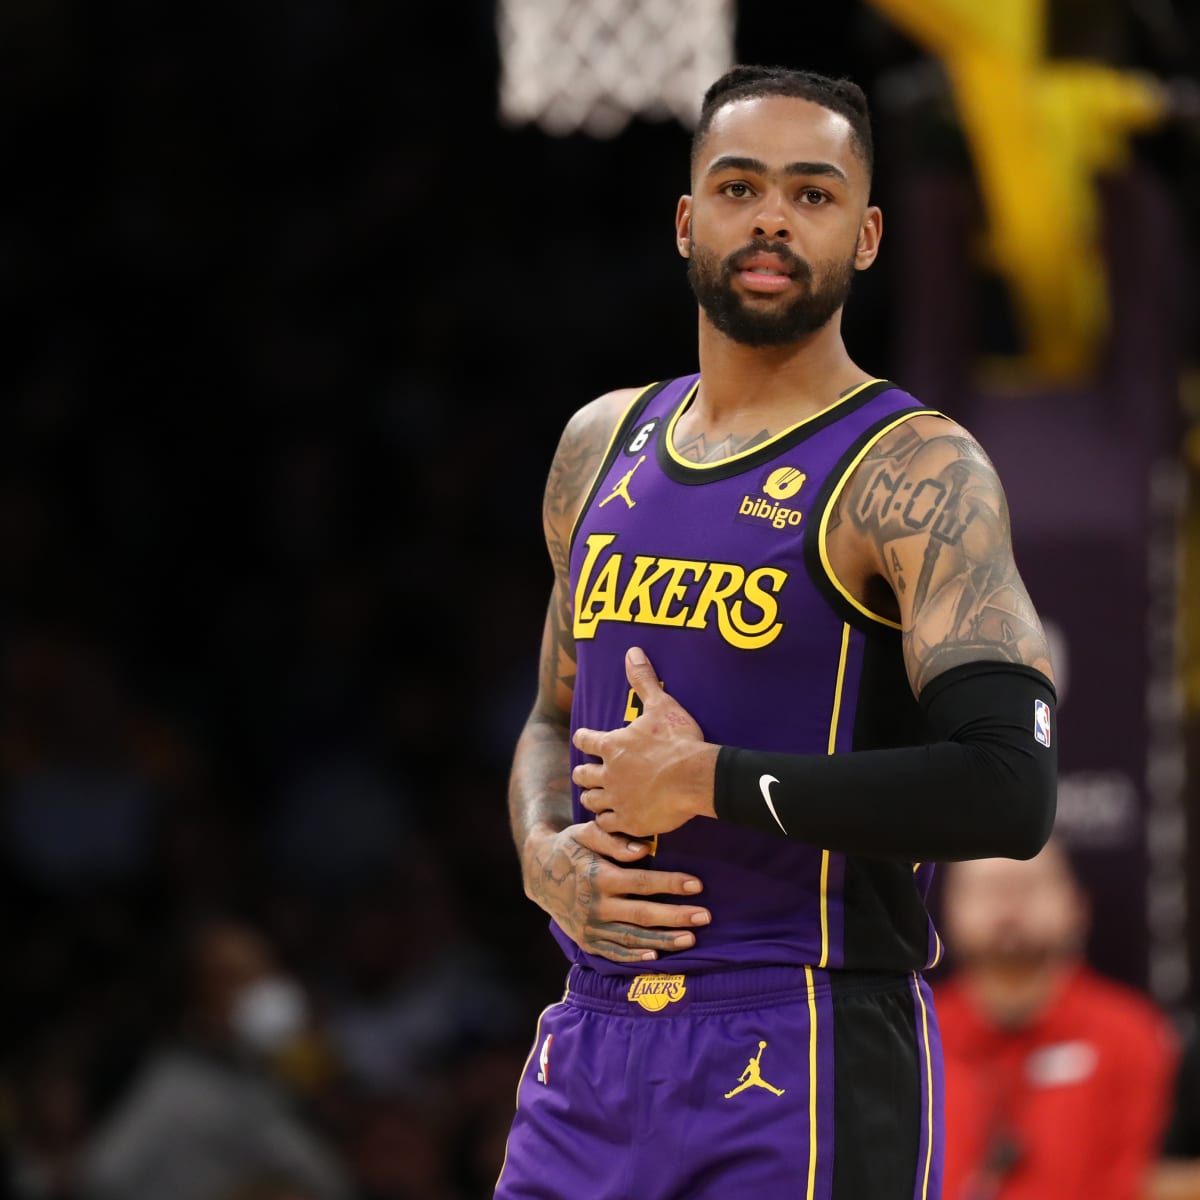 THE GAME: D'Angelo Russell returns to LA as Nets face Lakers